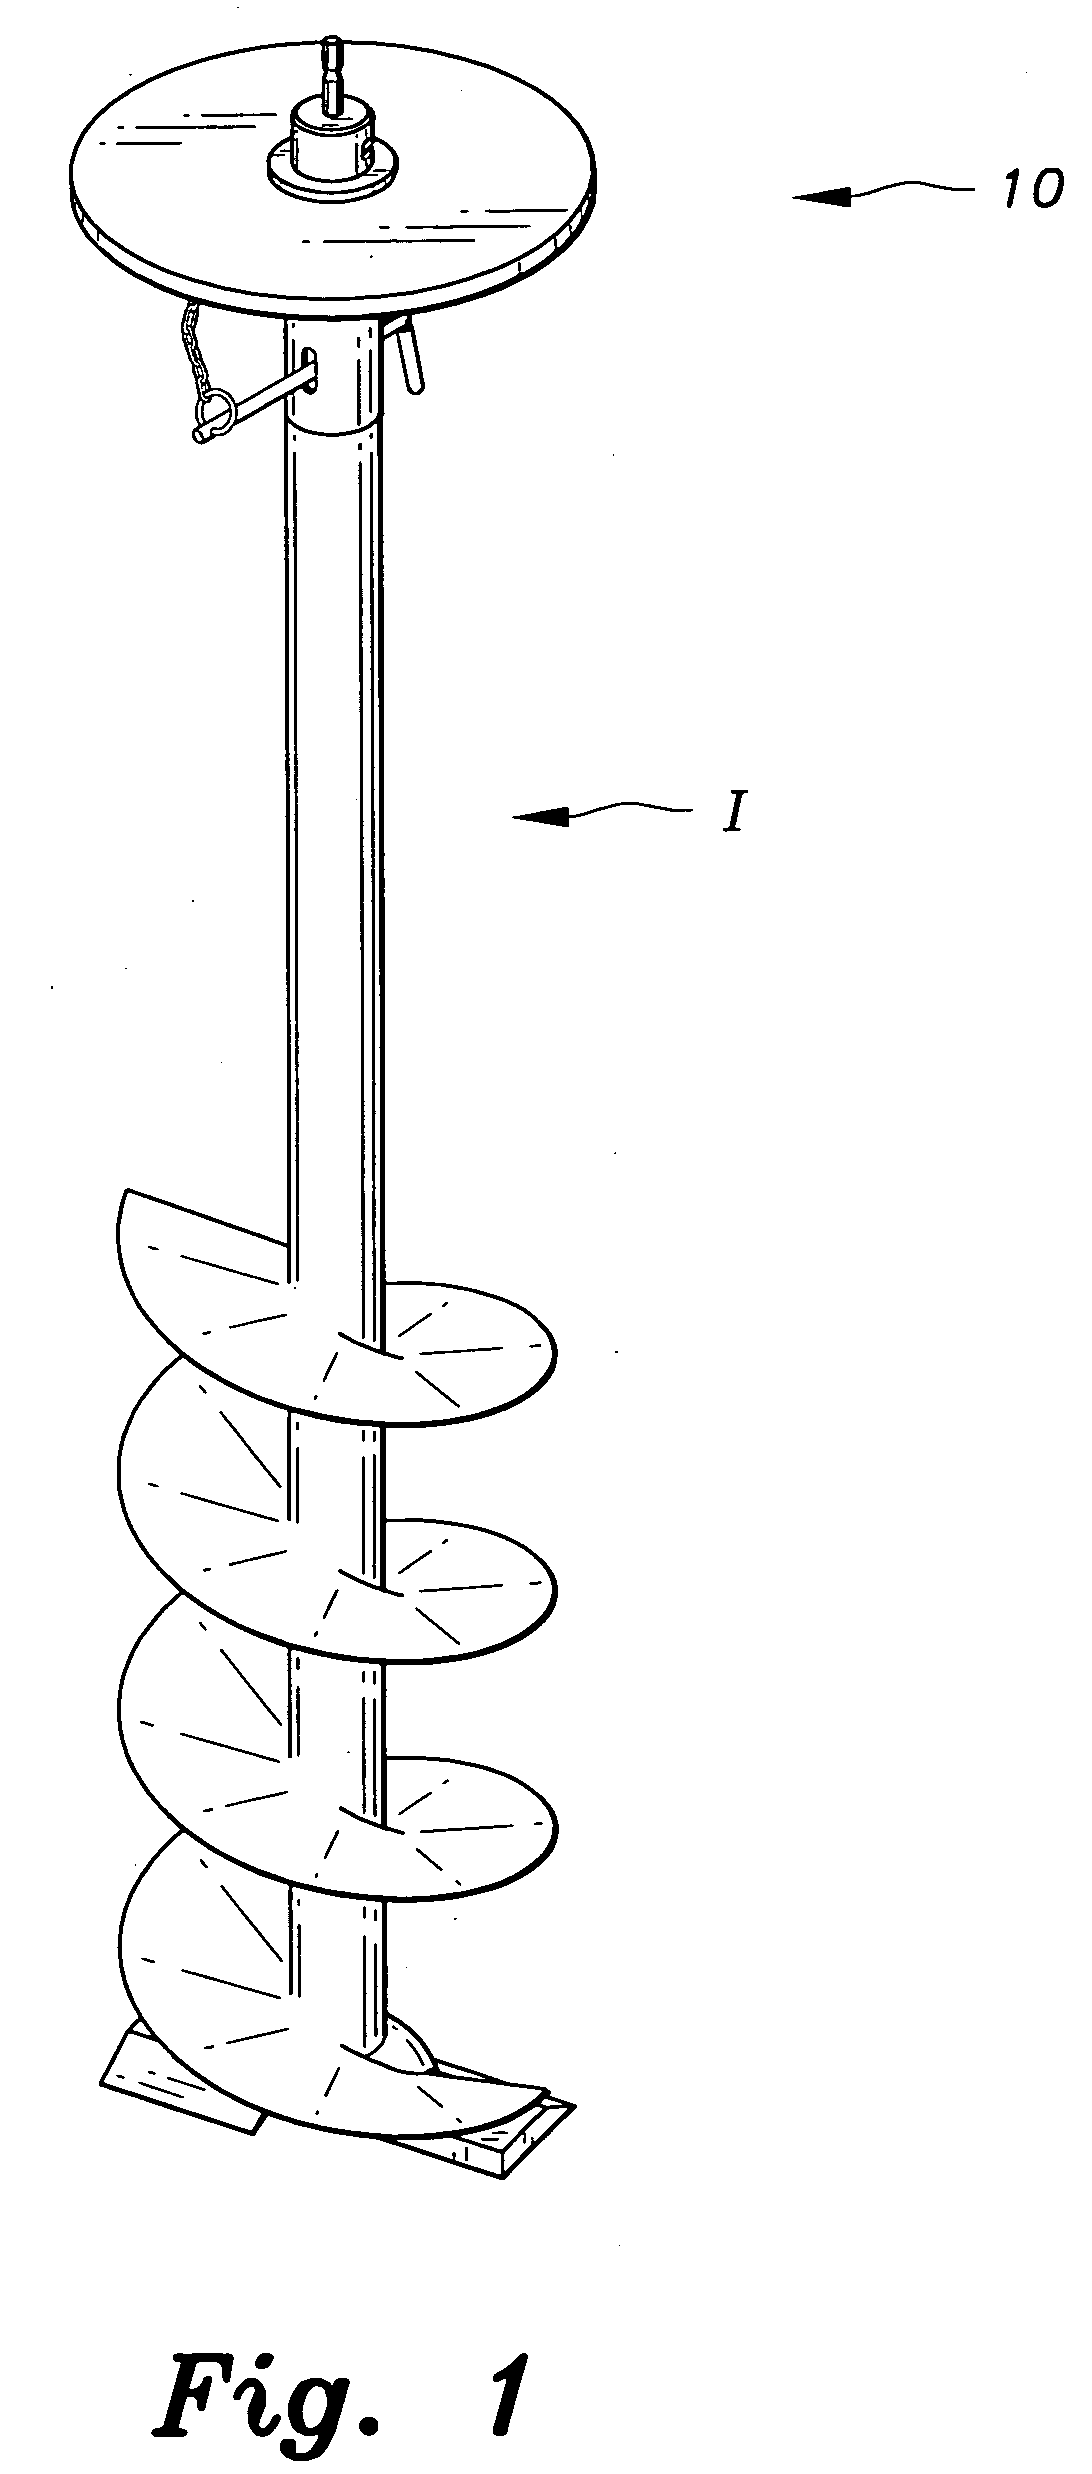 Drill adapter for an ice auger